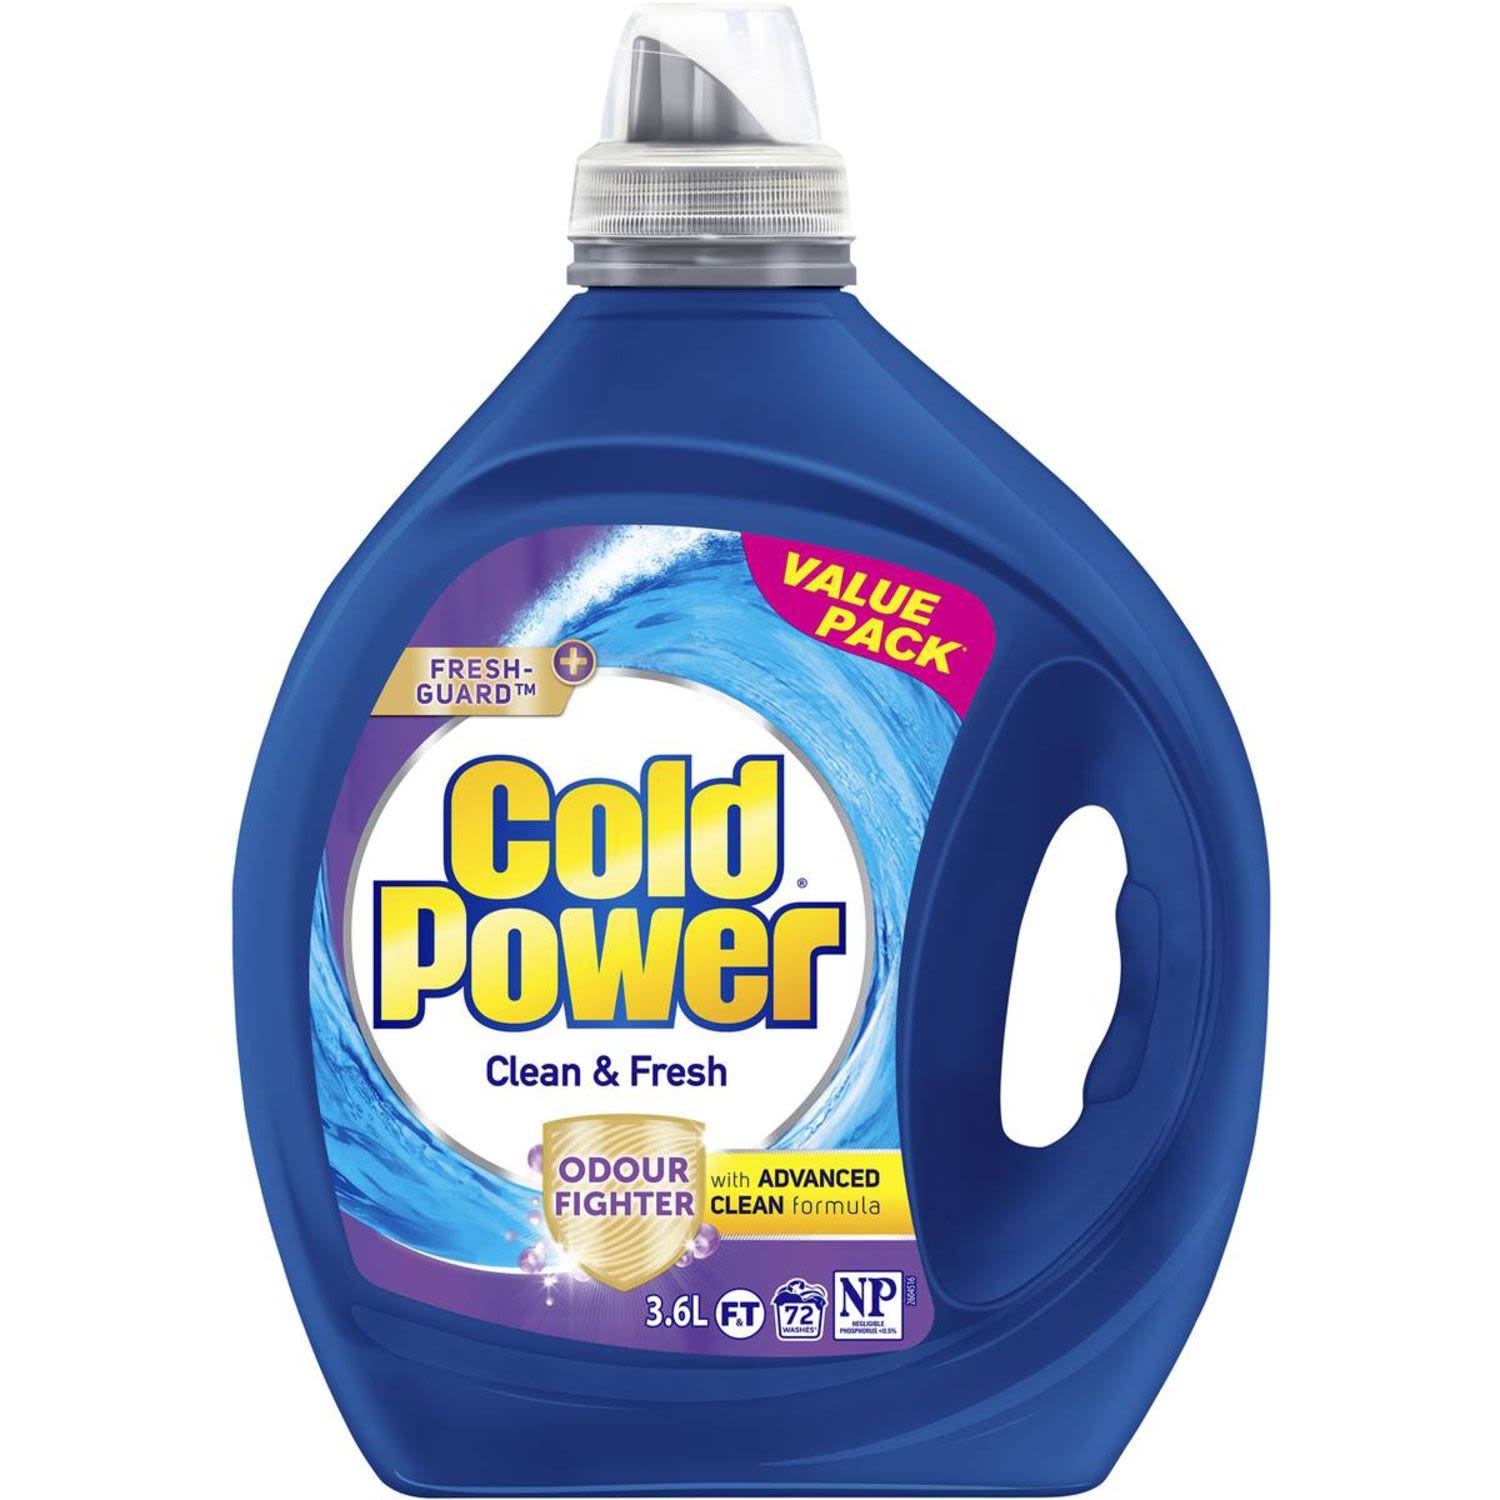 Cold Power Clean & Fresh Laundry Detergent with Odour Fighter, 3.6 Litre